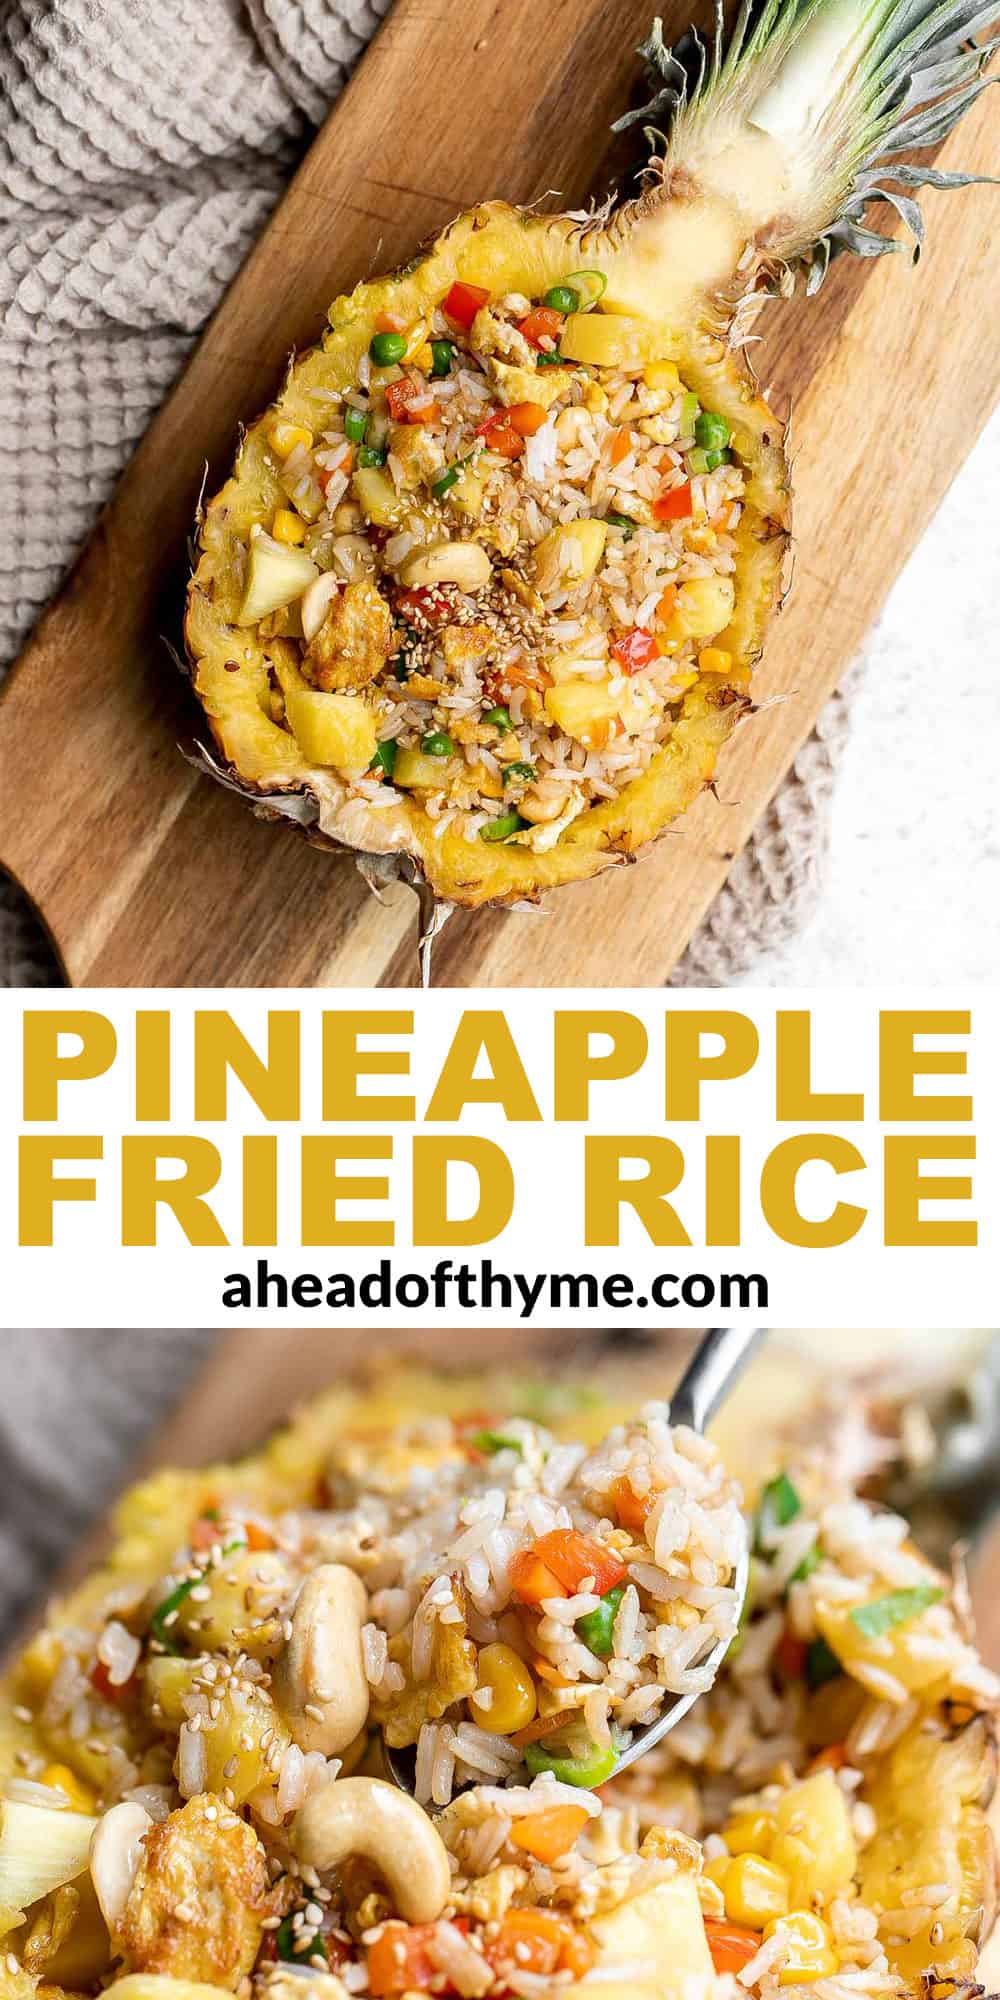 Pineapple fried rice is a quick and easy meal that is ready in just 20 minutes. It's a savory, sweet, delicious, and flavorful weeknight family dinner. | aheadofthyme.com